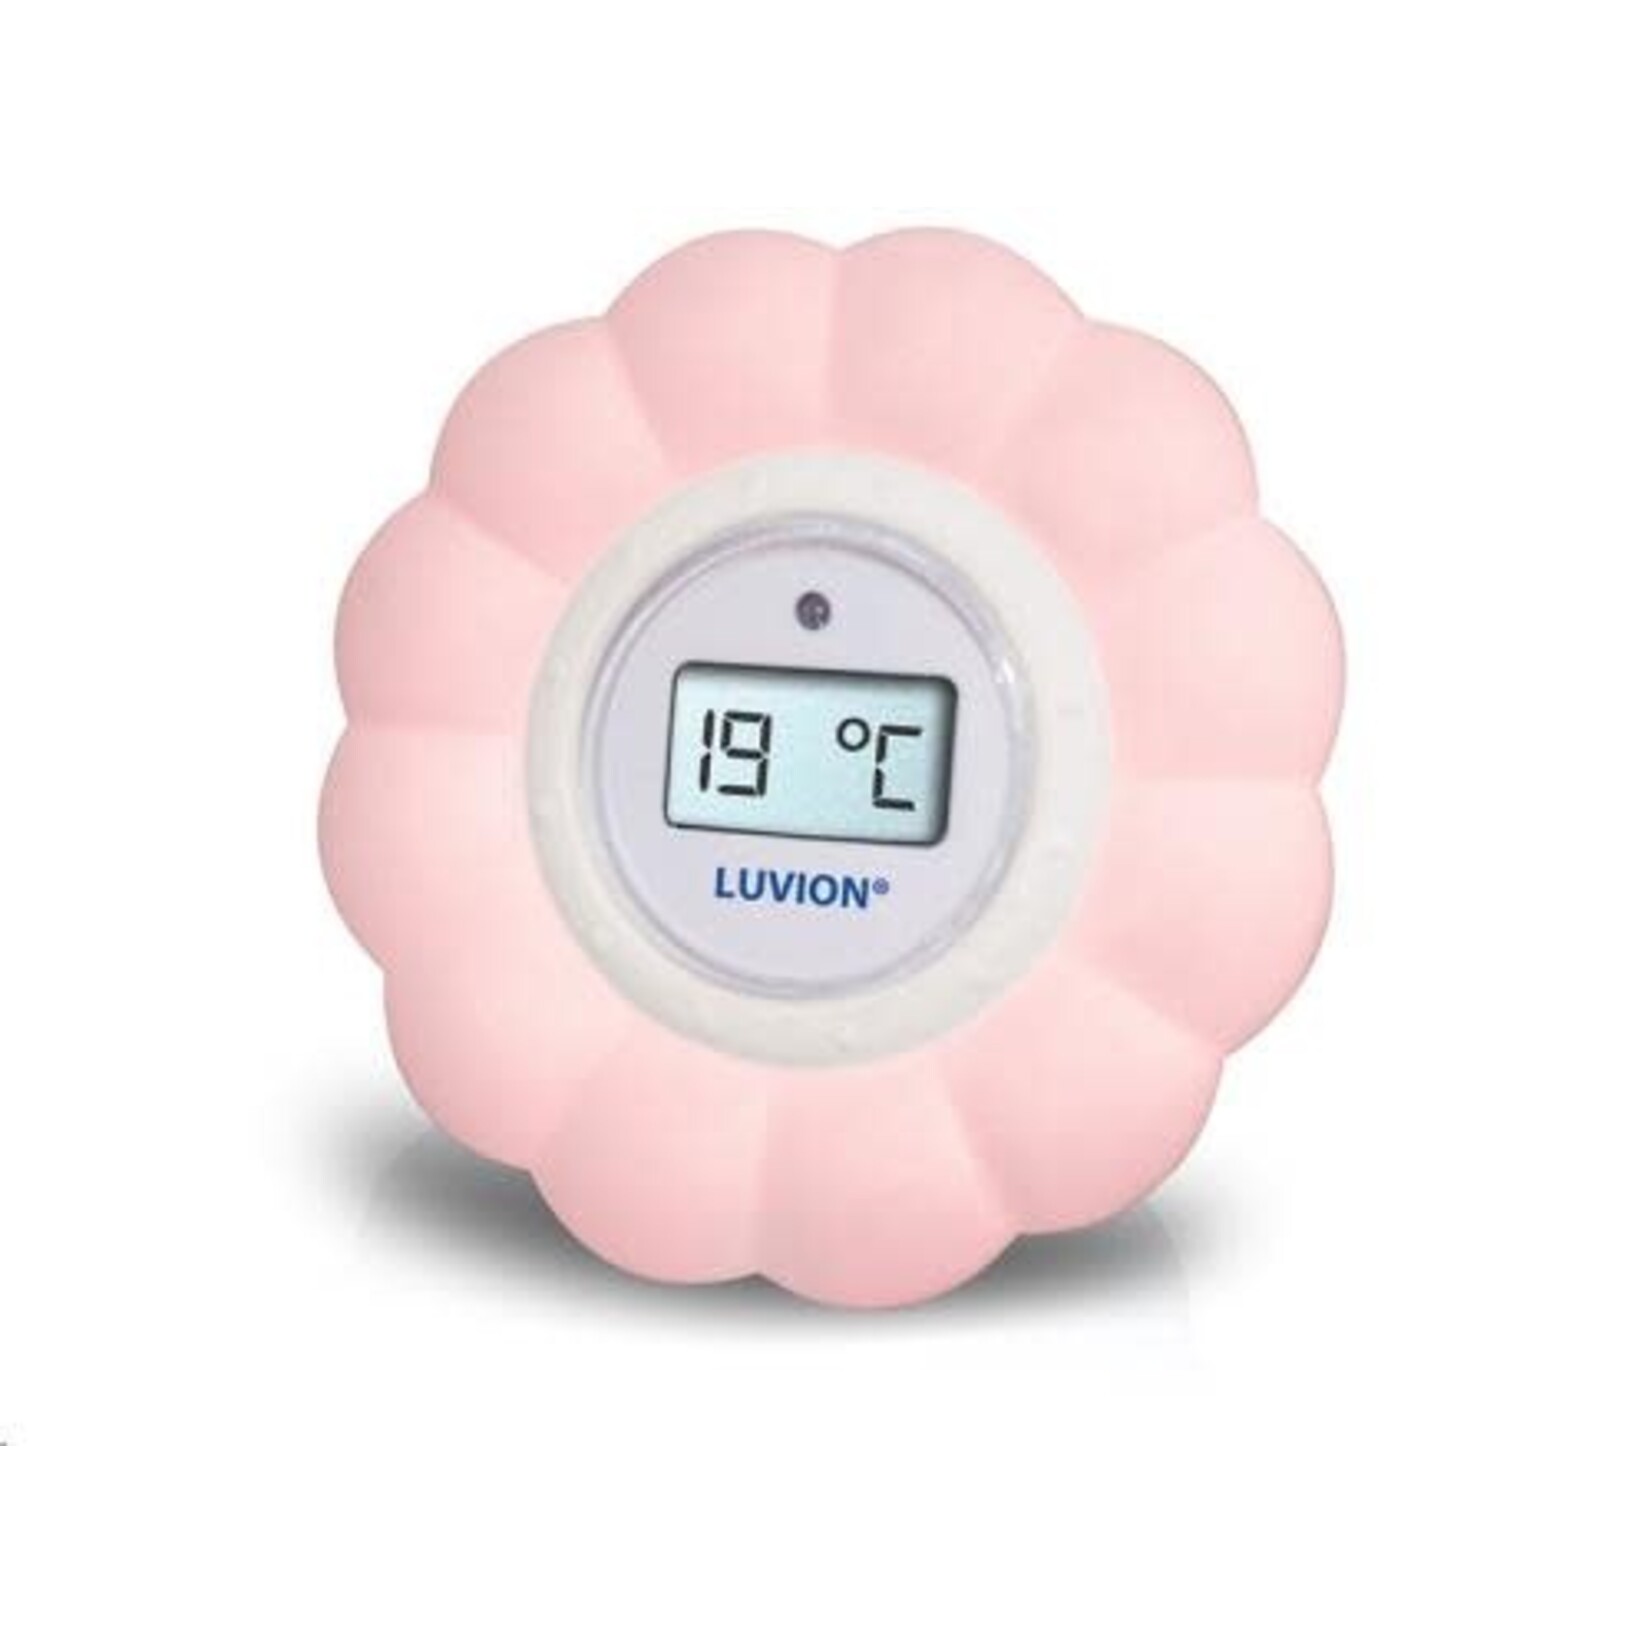 Luvion Luvion Bath/Room thermometer pink